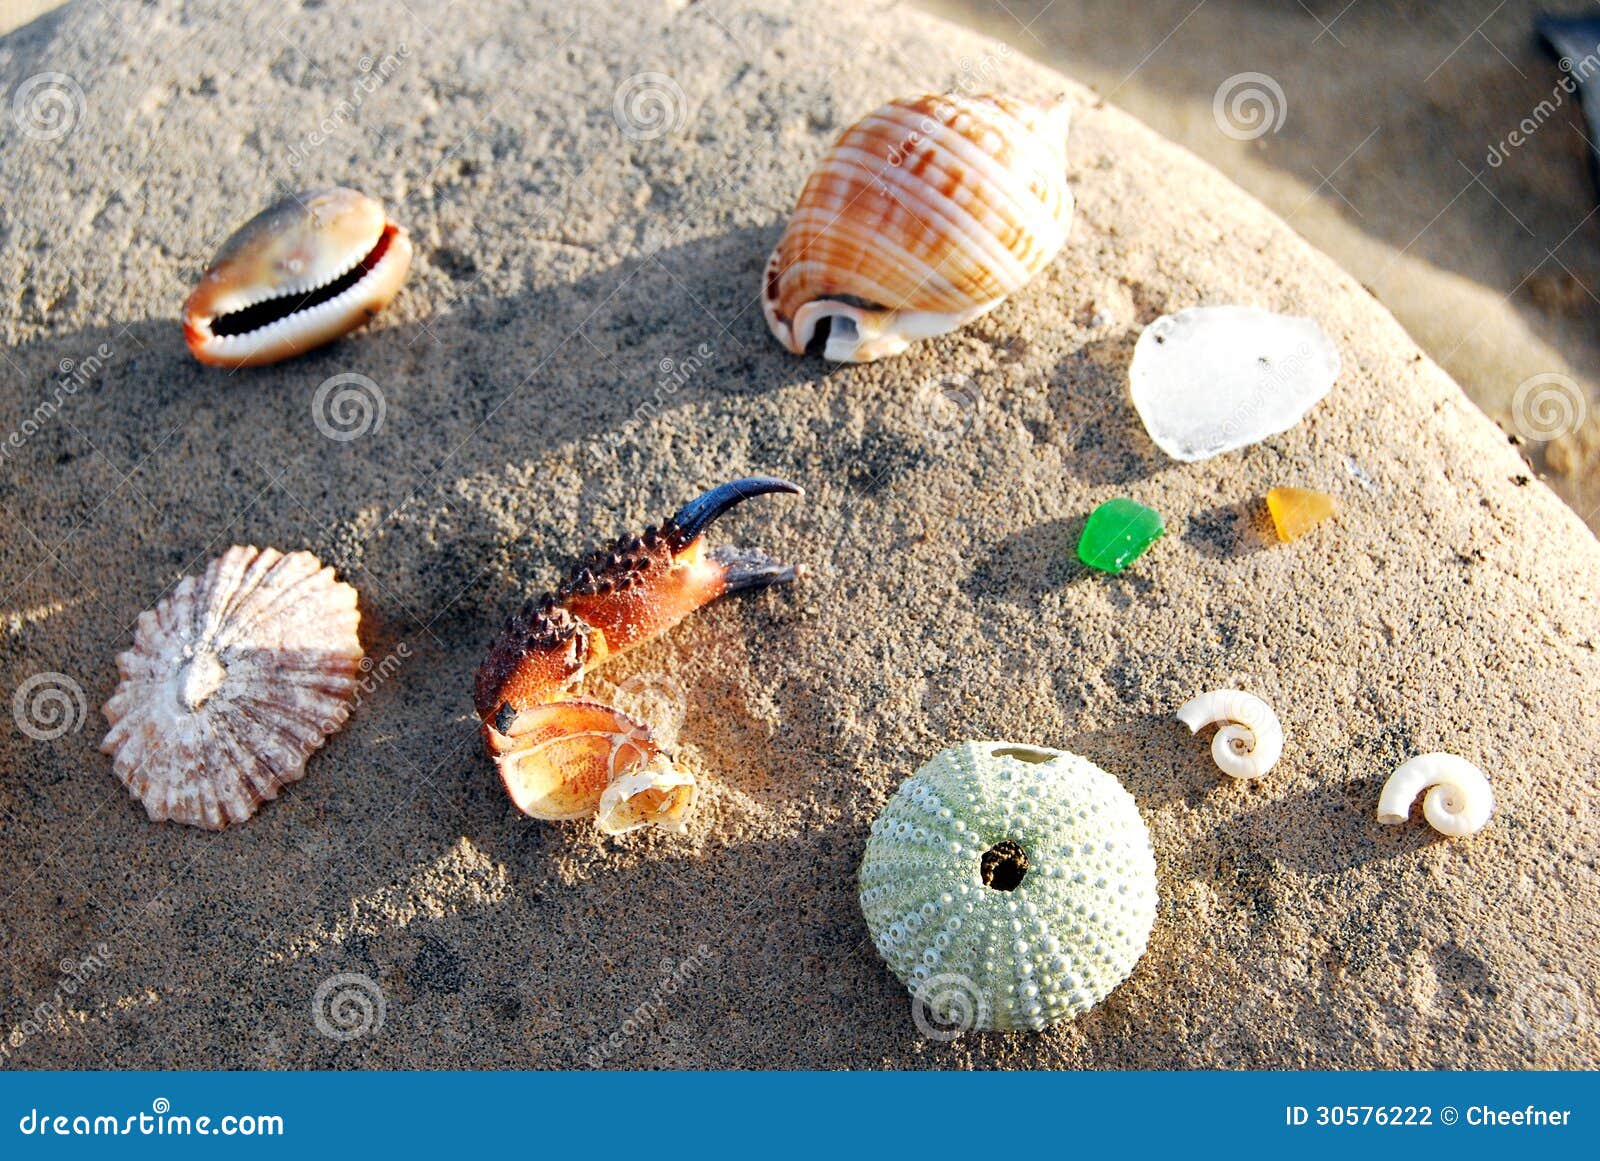 Beautiful Things Get Washed Up the Beaches Stock Photo - Image of ocean,  jetsam: 30576222